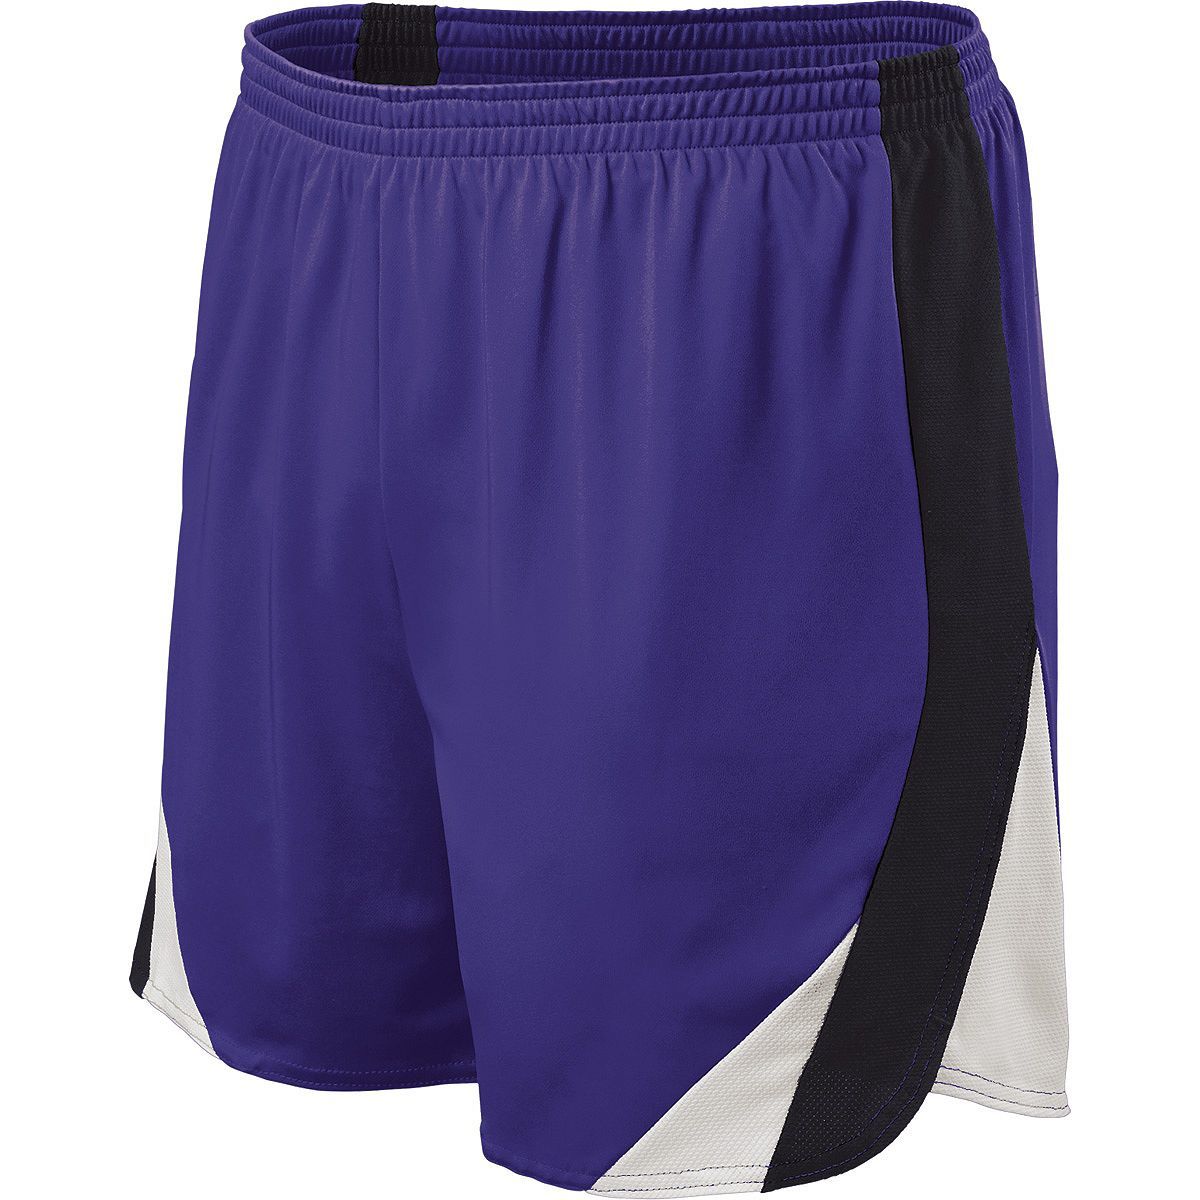 Holloway Approach Shorts in Purple/Black/White  -Part of the Adult, Adult-Shorts, Track-Field, Holloway product lines at KanaleyCreations.com